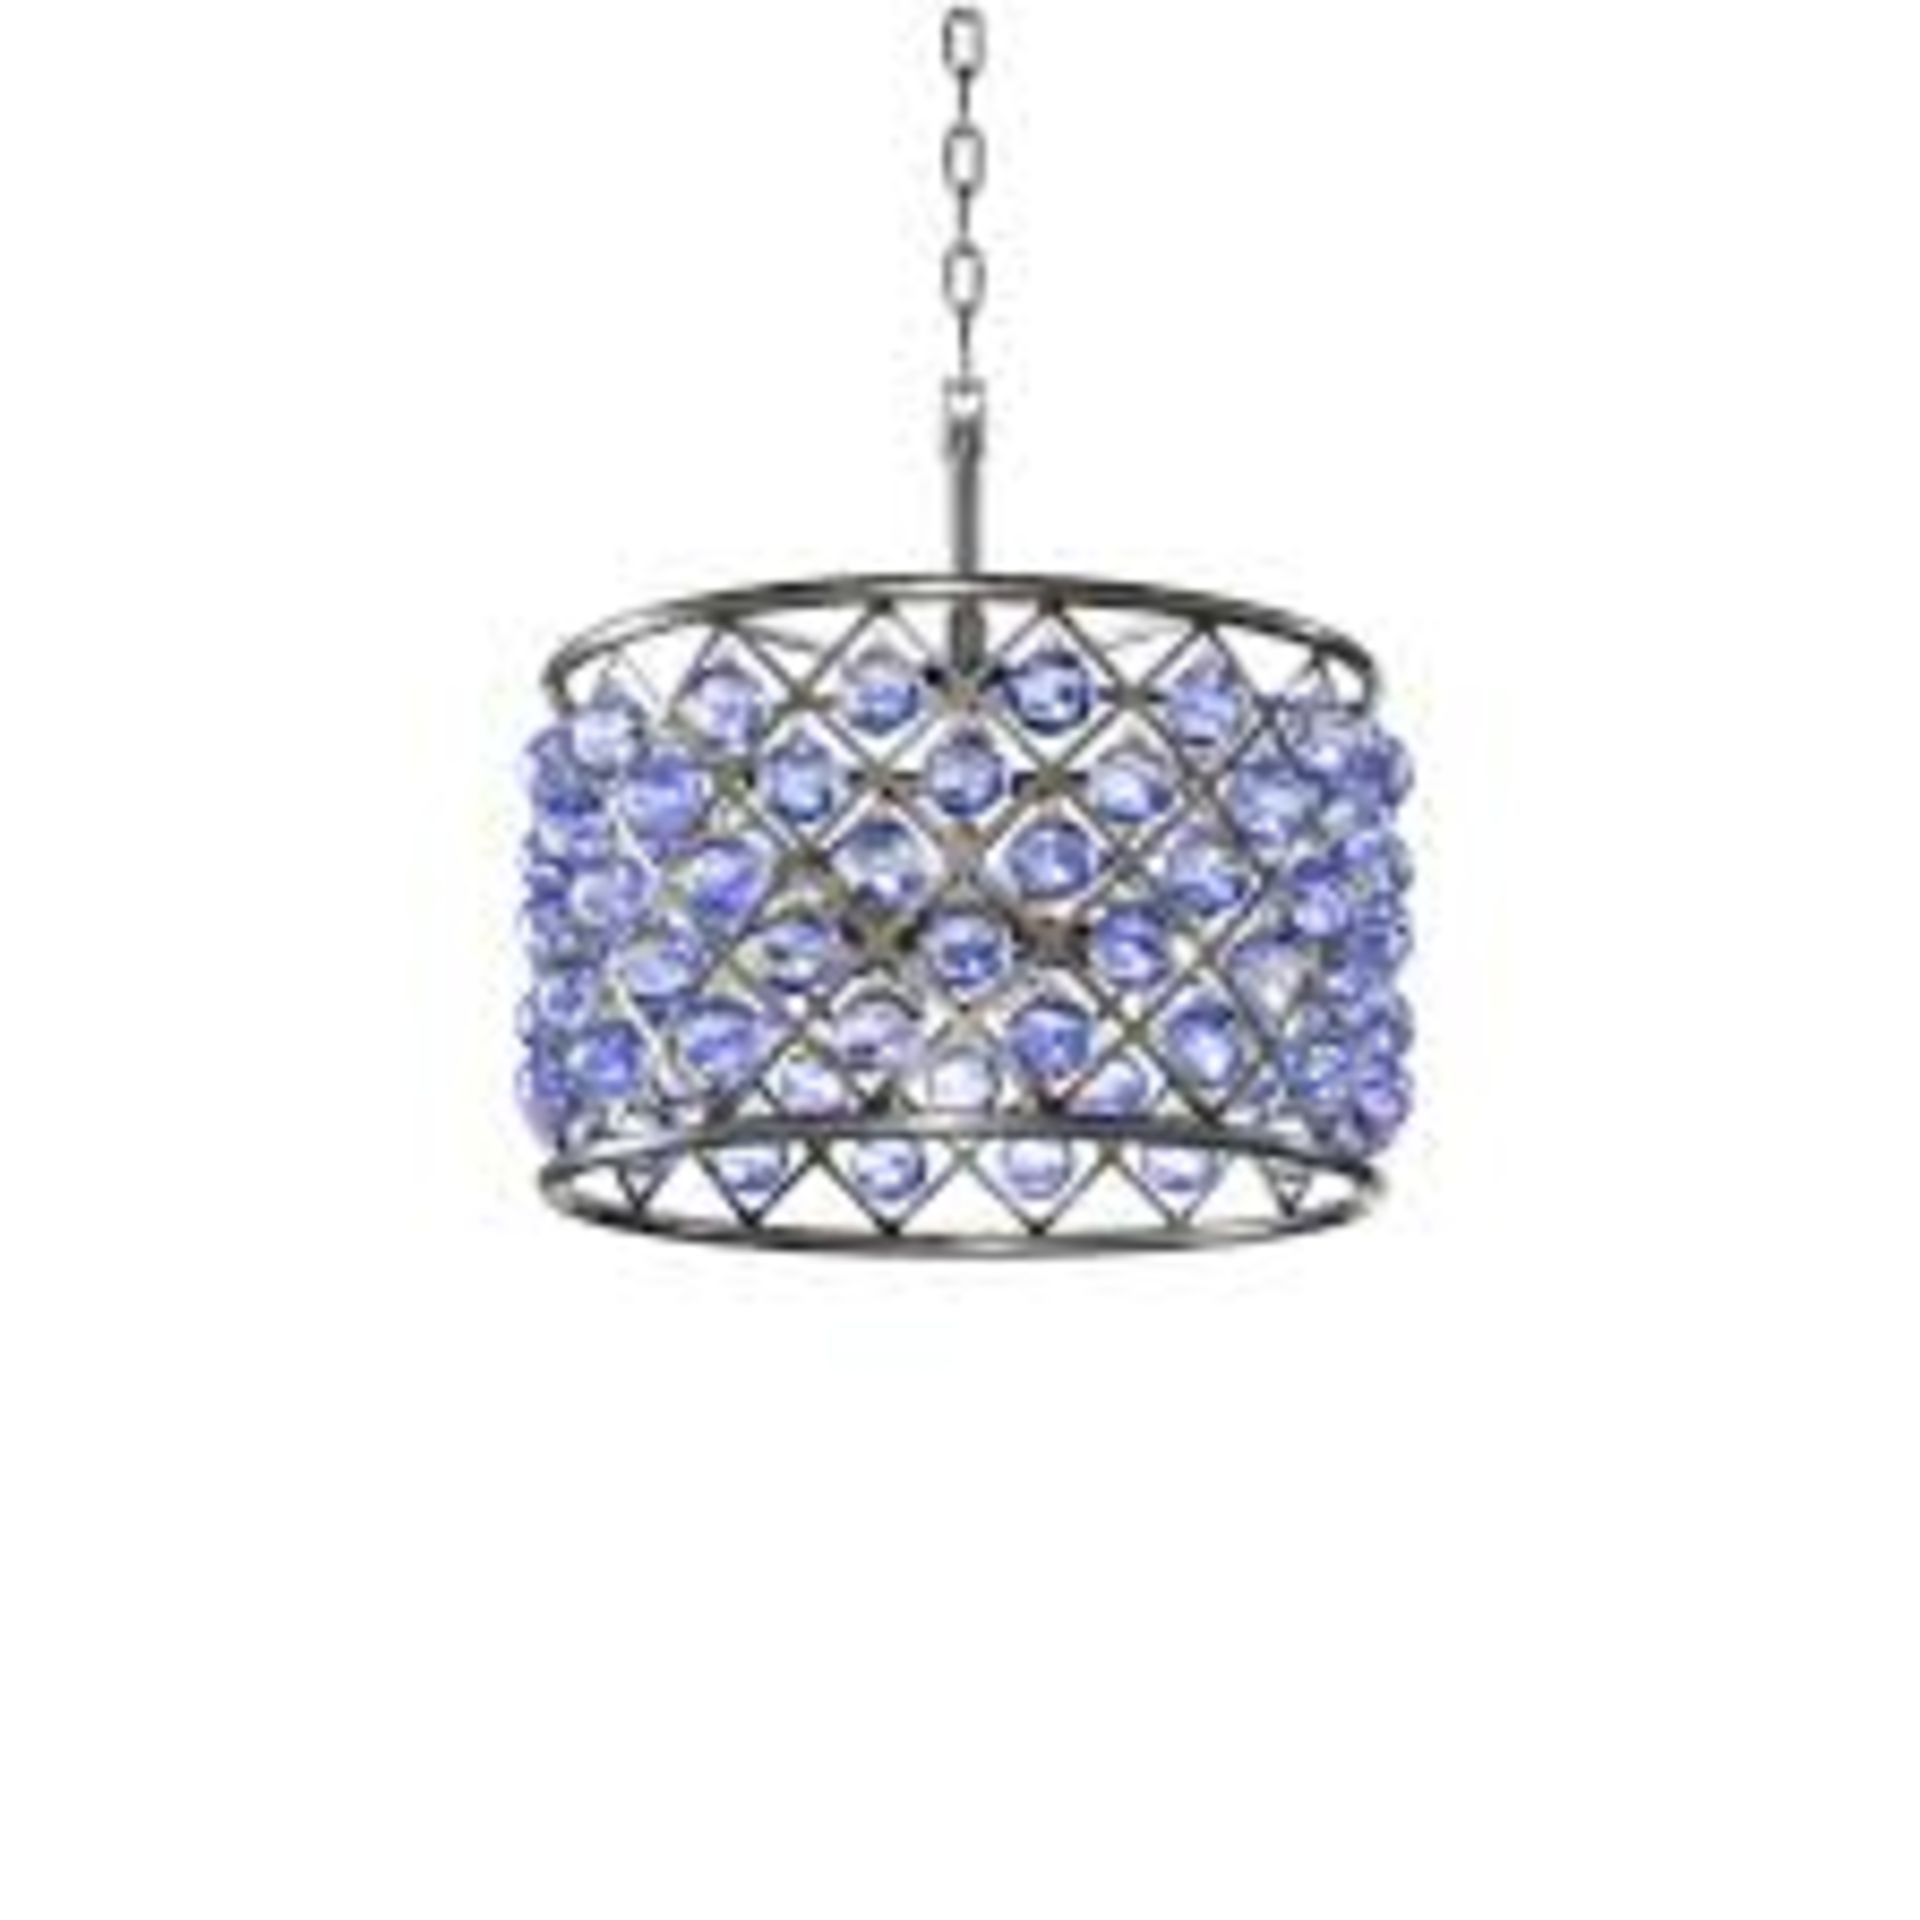 Zig Zag Pendant (UK) Blue & Natural The Zig Zag Collection Features Delicate Spheres Of Optical - Image 2 of 2